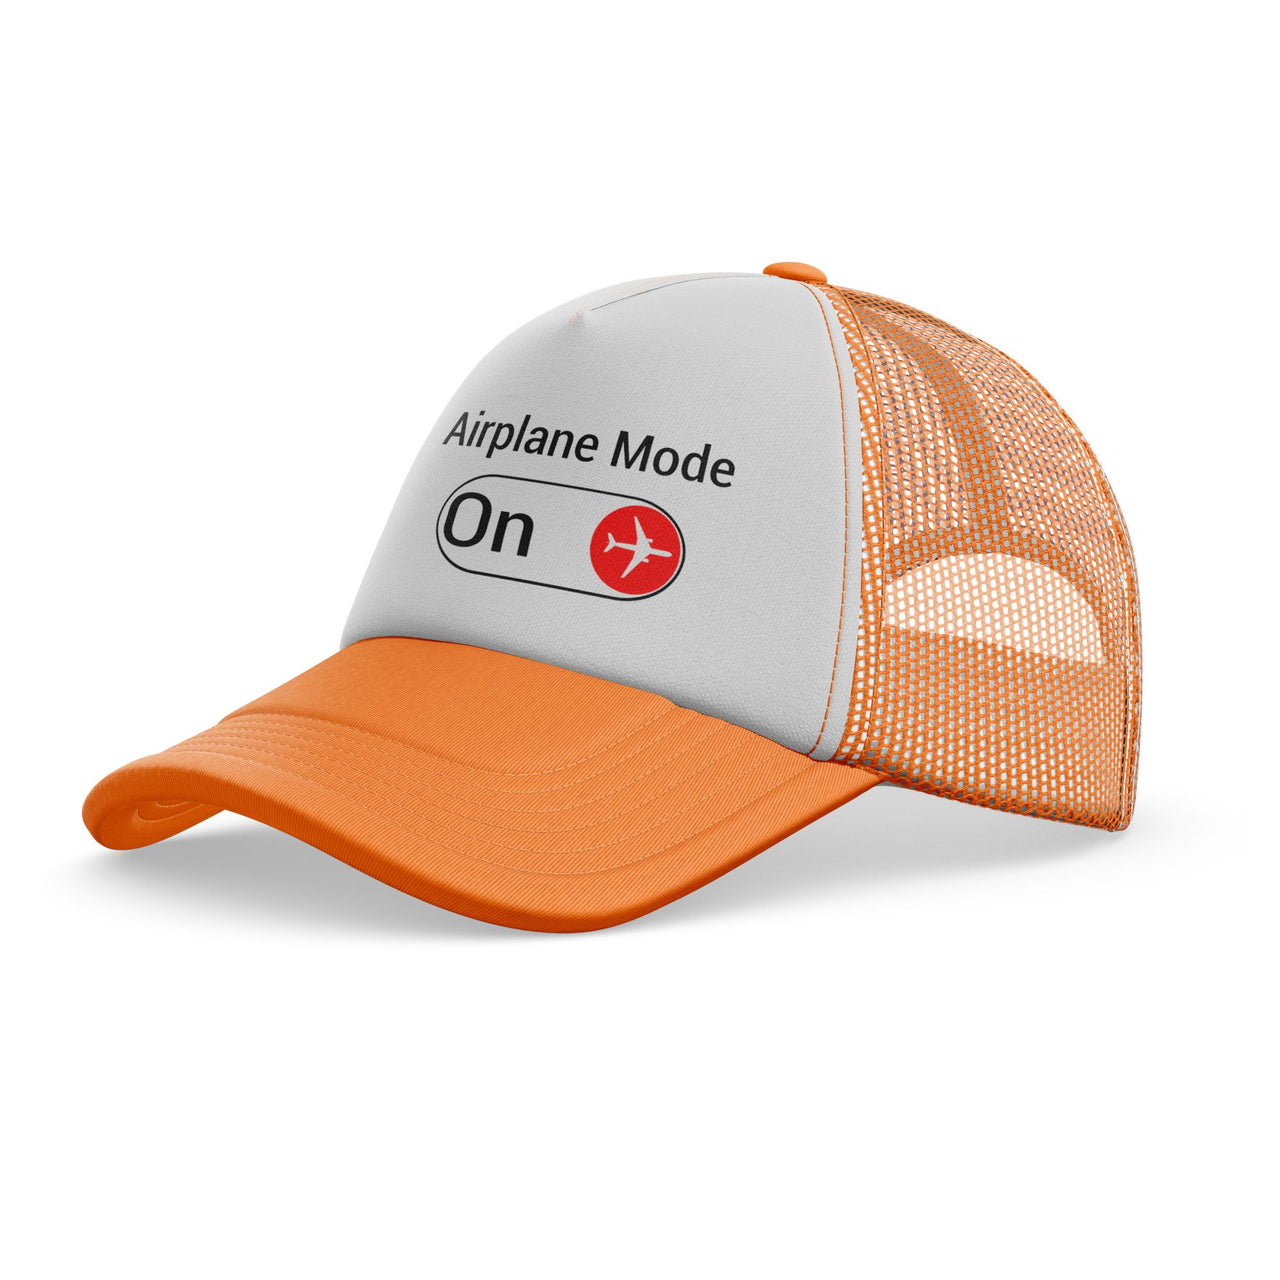 Airplane Mode On Designed Trucker Caps & Hats